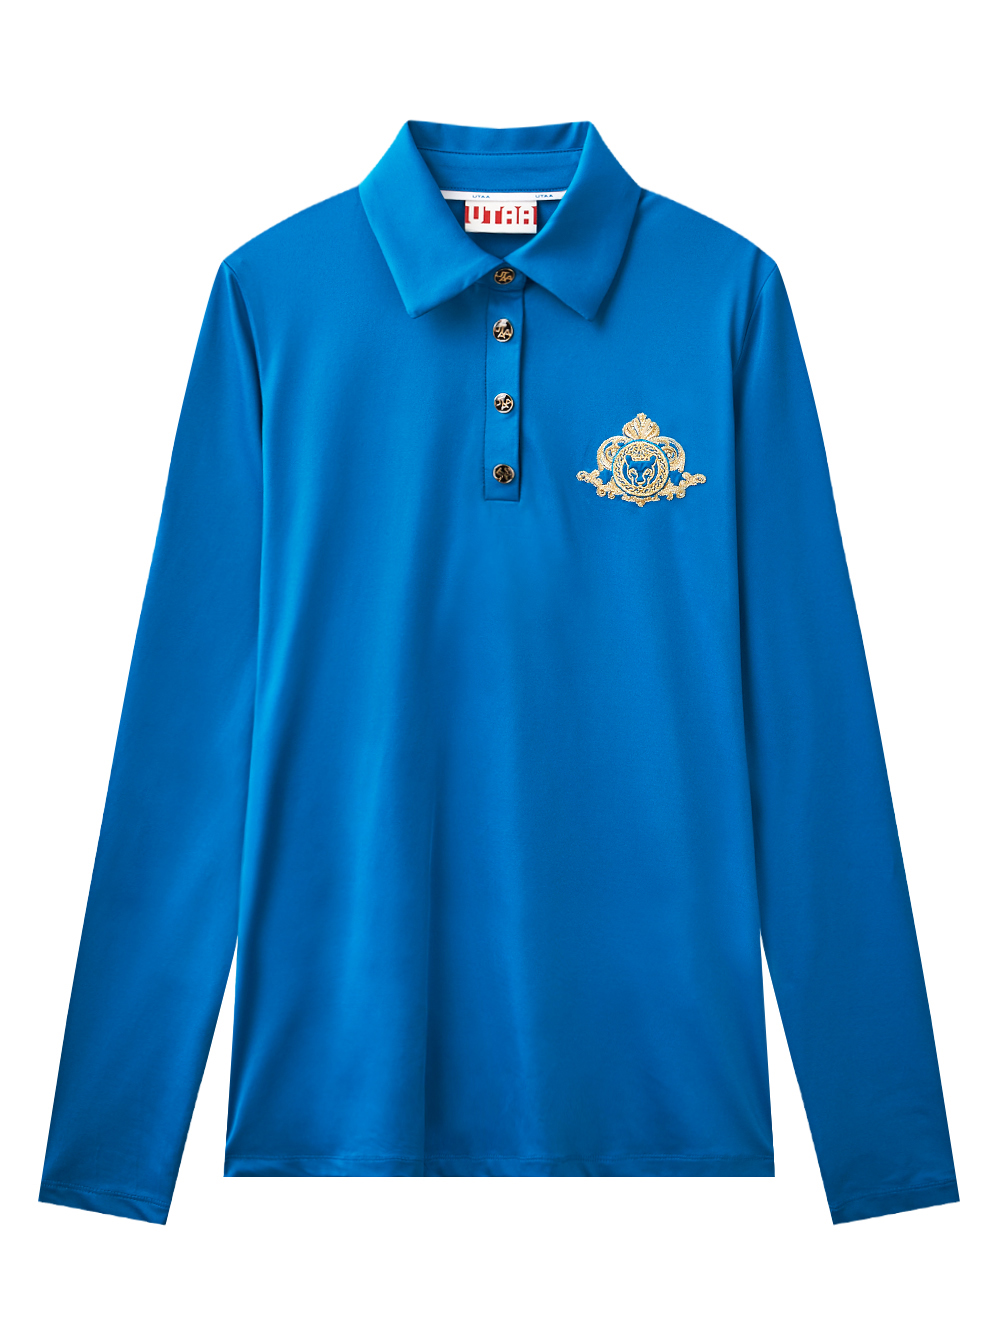 UTAA Grand Gold Crown Panther PK Sleeve : Women&#039;s Blue (UD2TLF286BL)